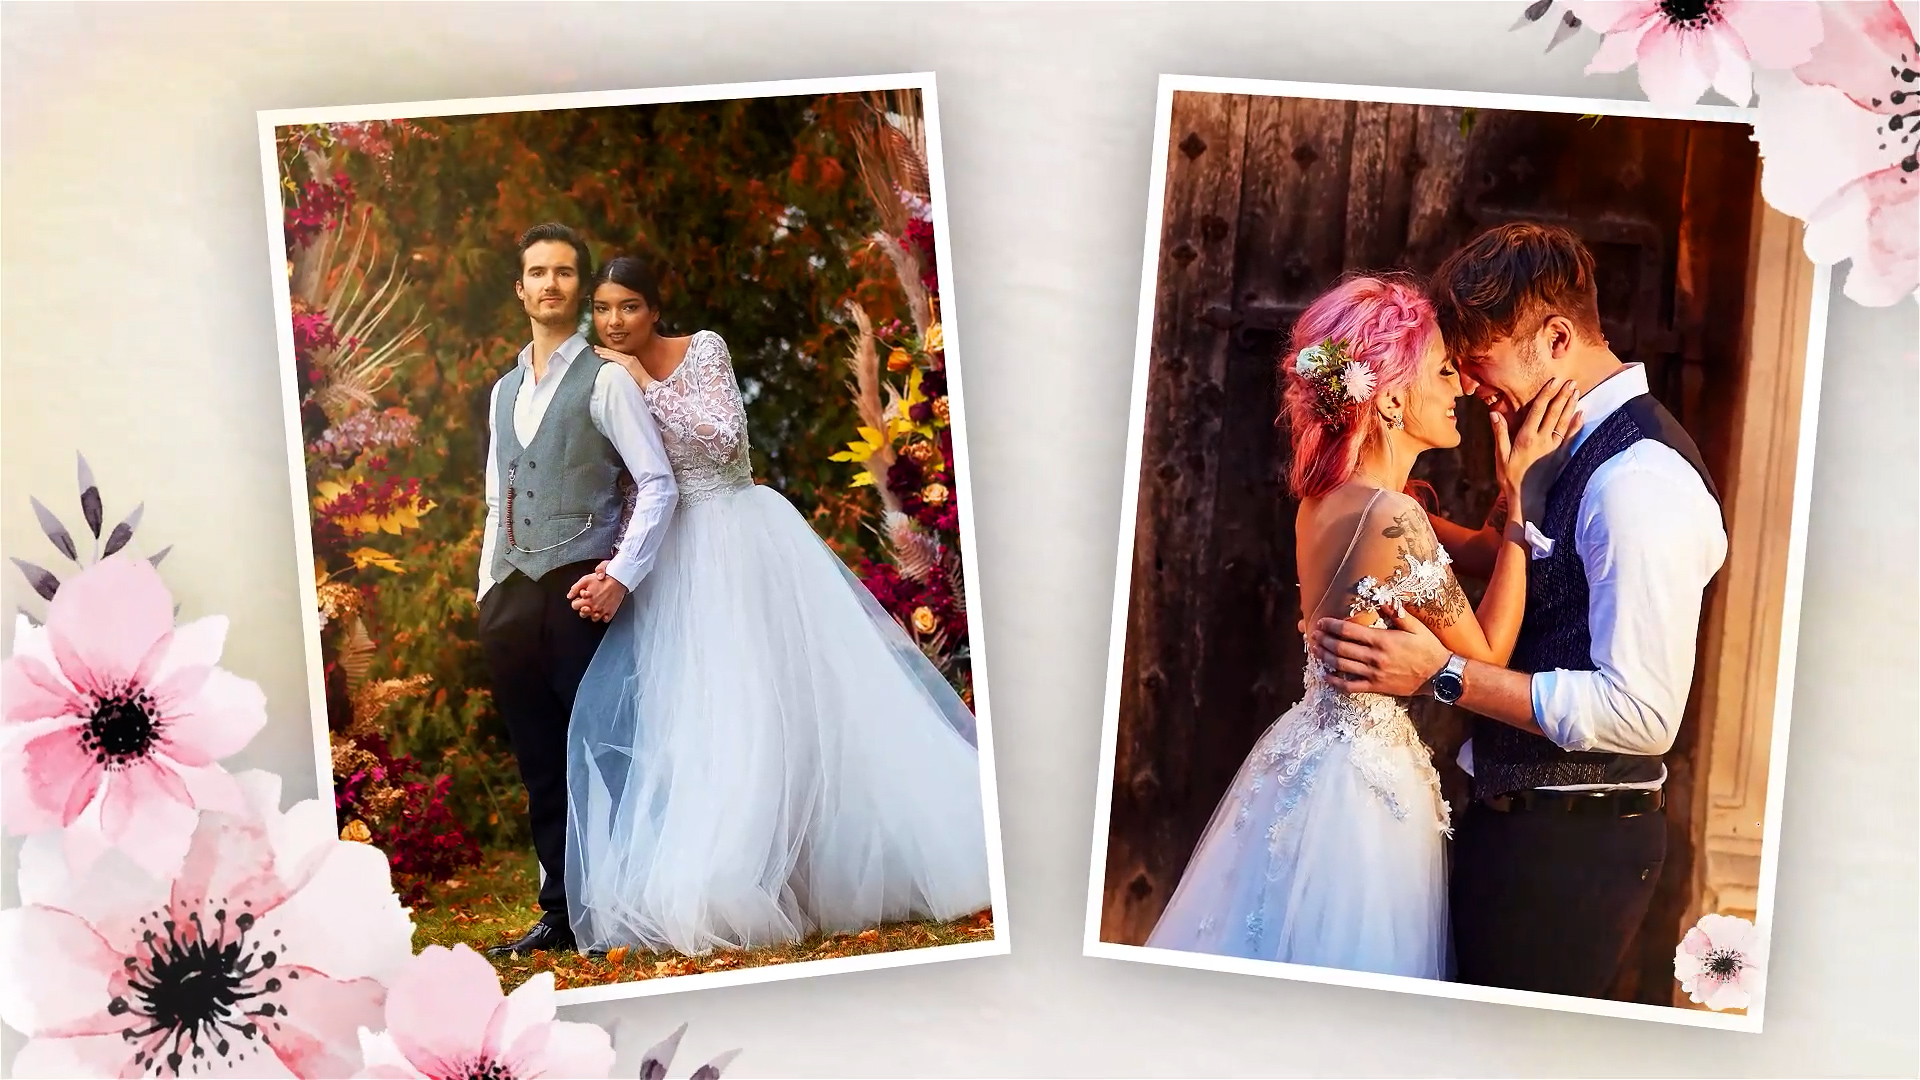 Romantic Wedding Photo Slideshow 50821097 Videohive - Free Download After Effects Template